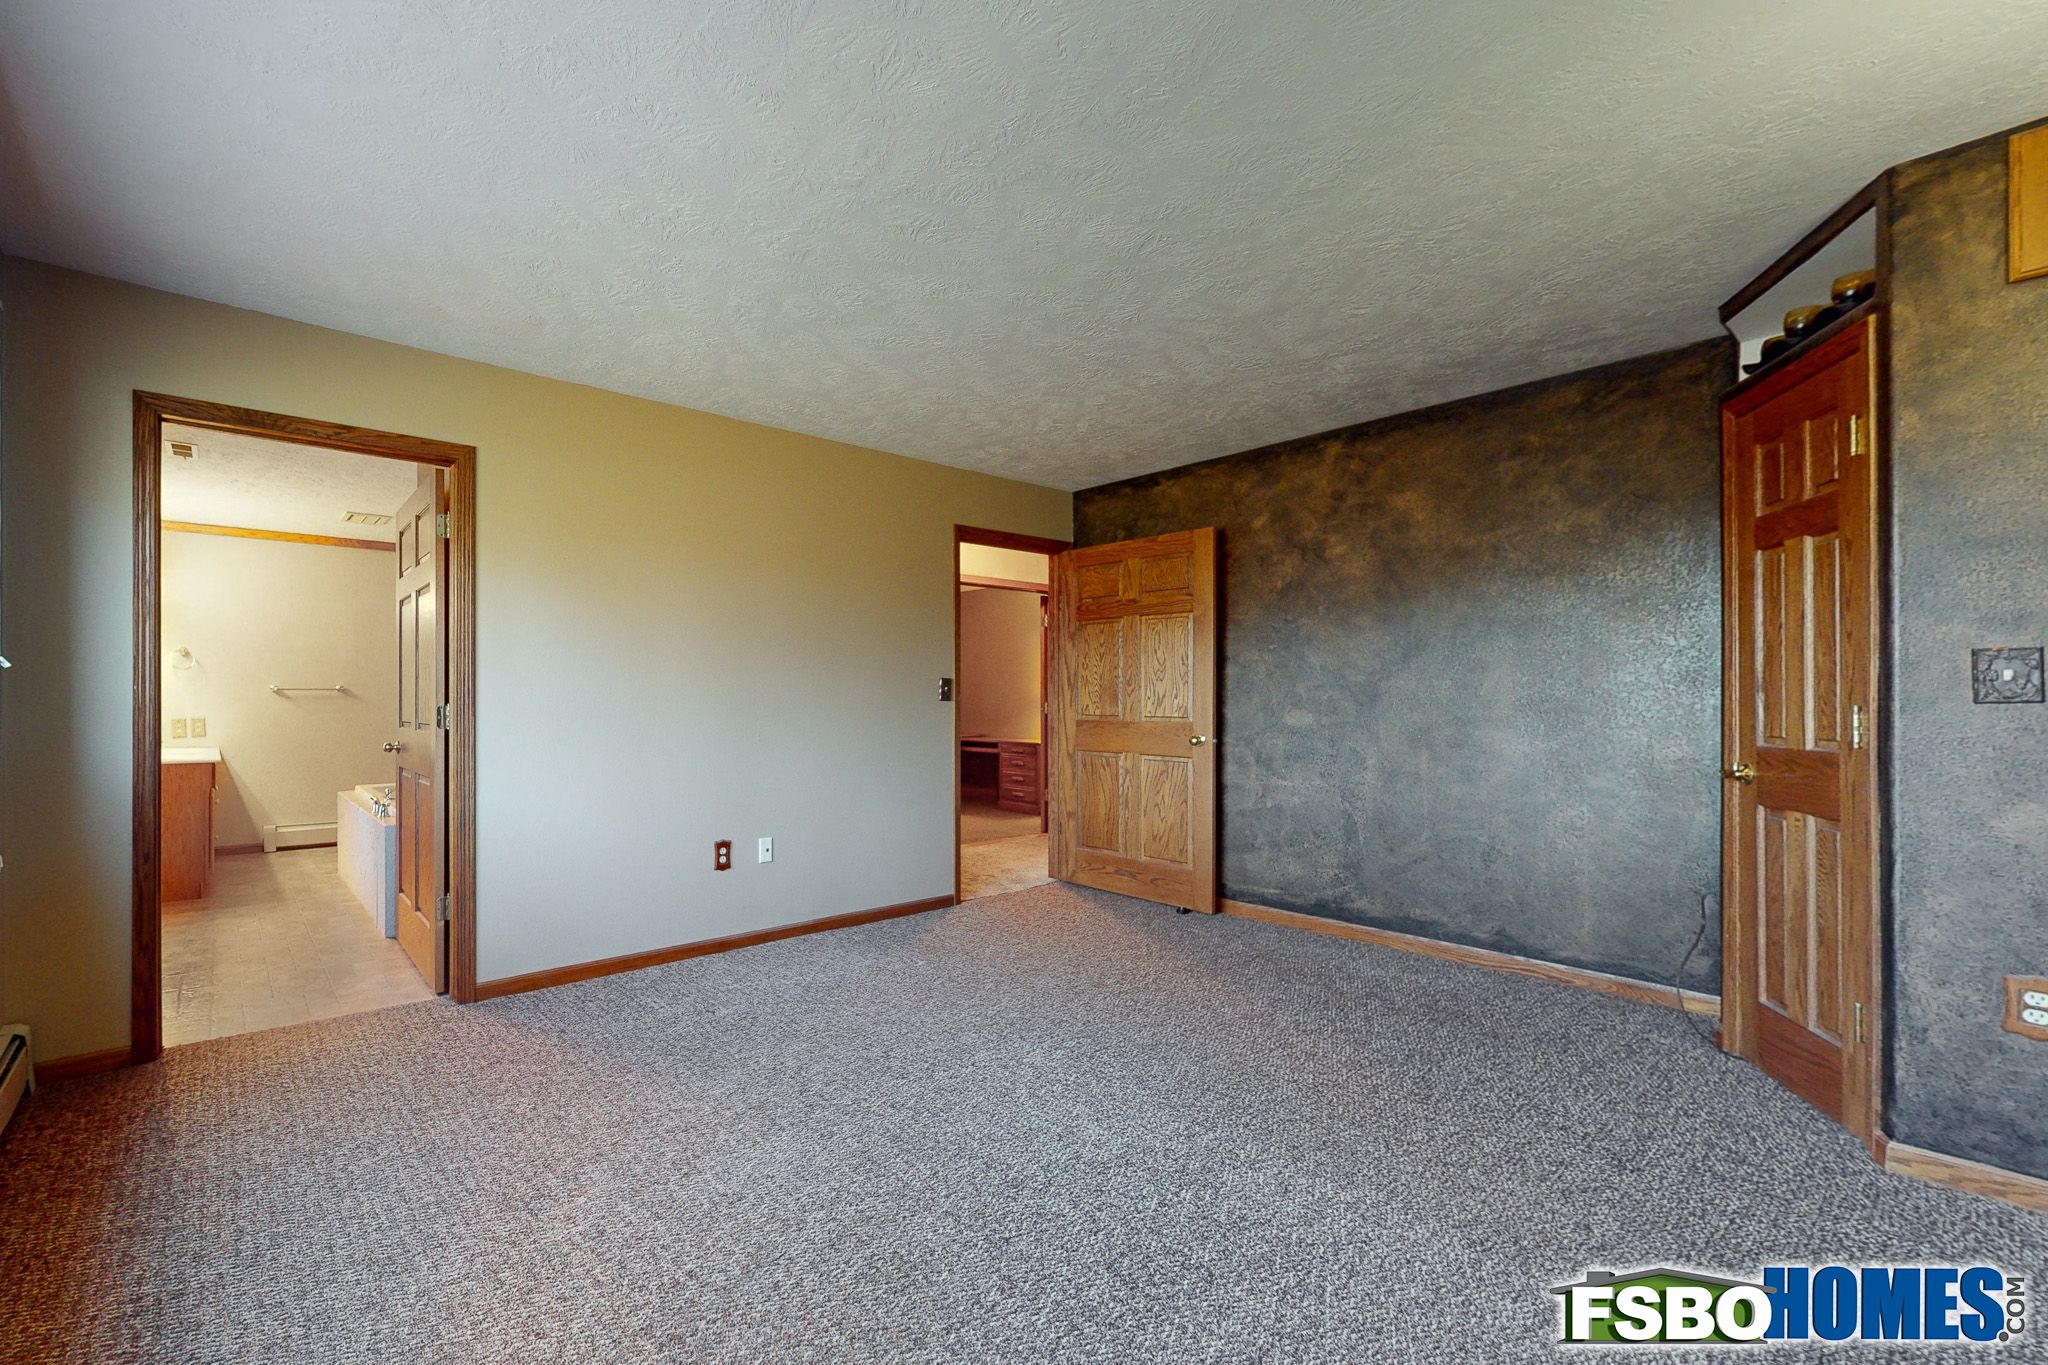 47216 256th St, Renner, SD, Image 11